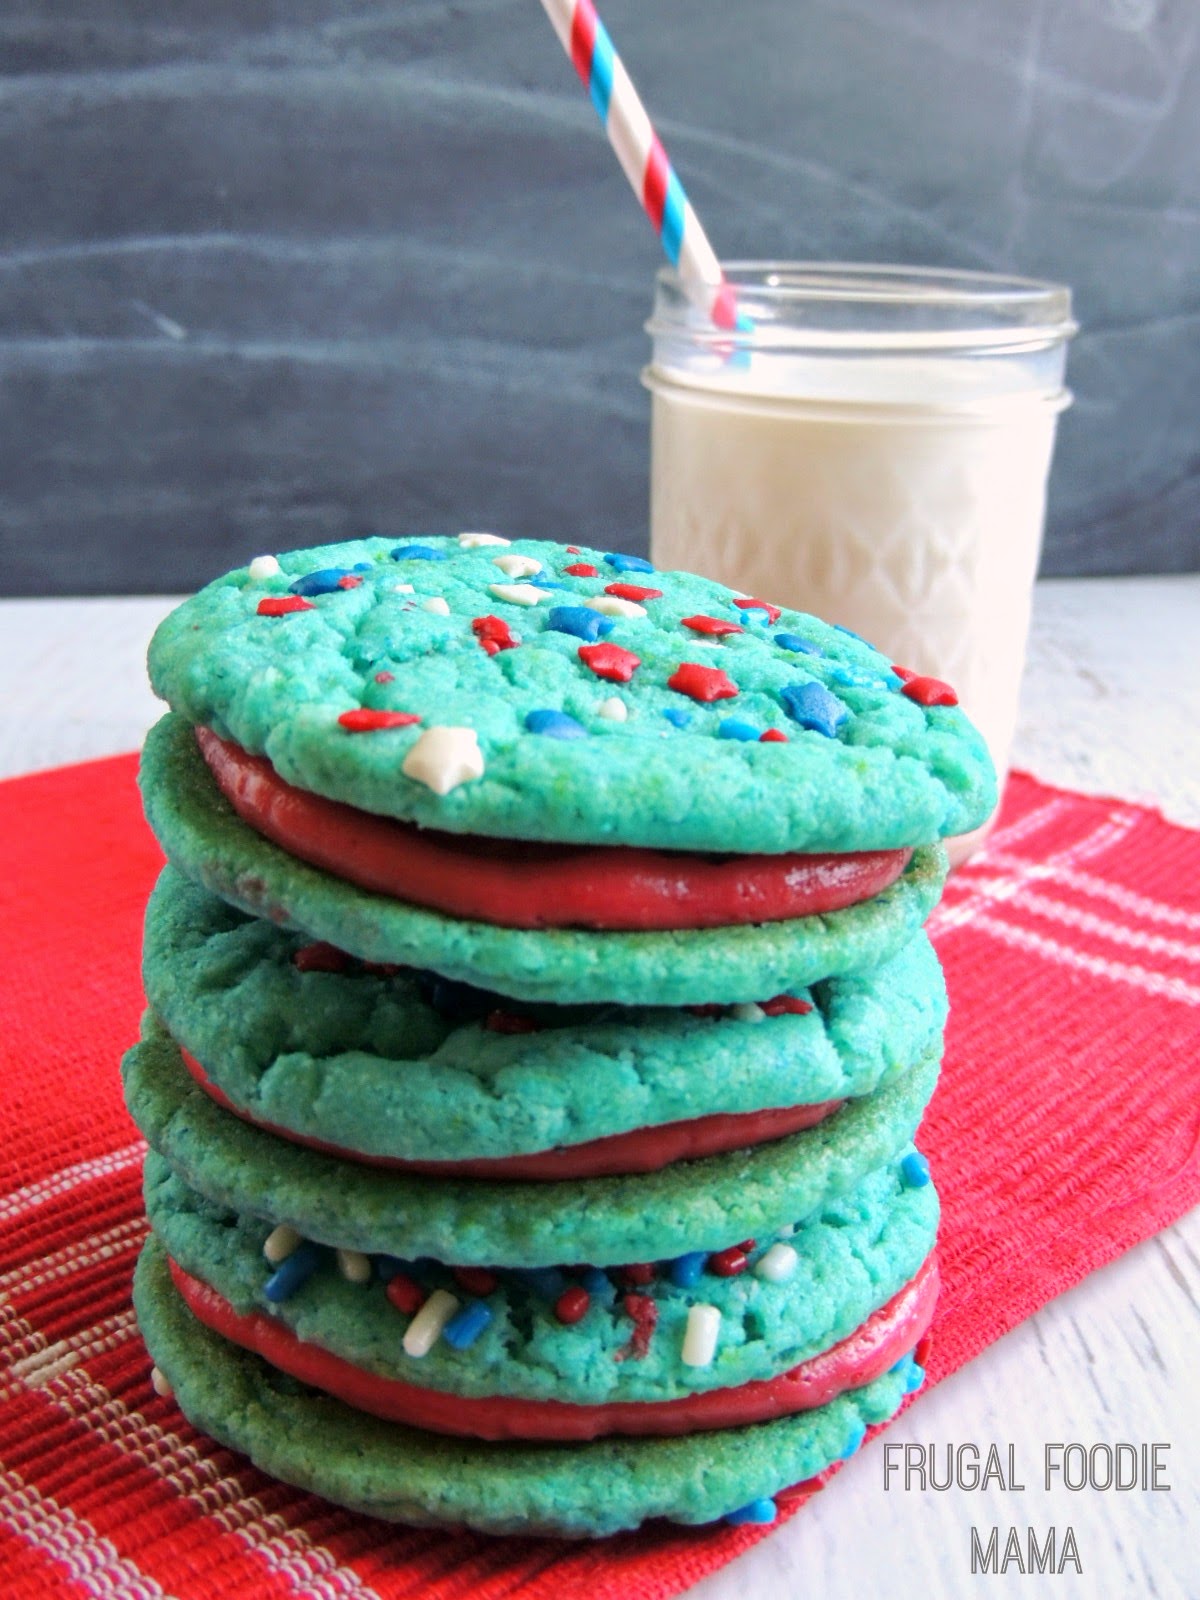 A fresh raspberry buttercream is sandwiched between two soft & chewy blue velvet cake mix cookies in these perfectly patriotic Blue Velvet & Raspberry Buttercream Cookiewiches.